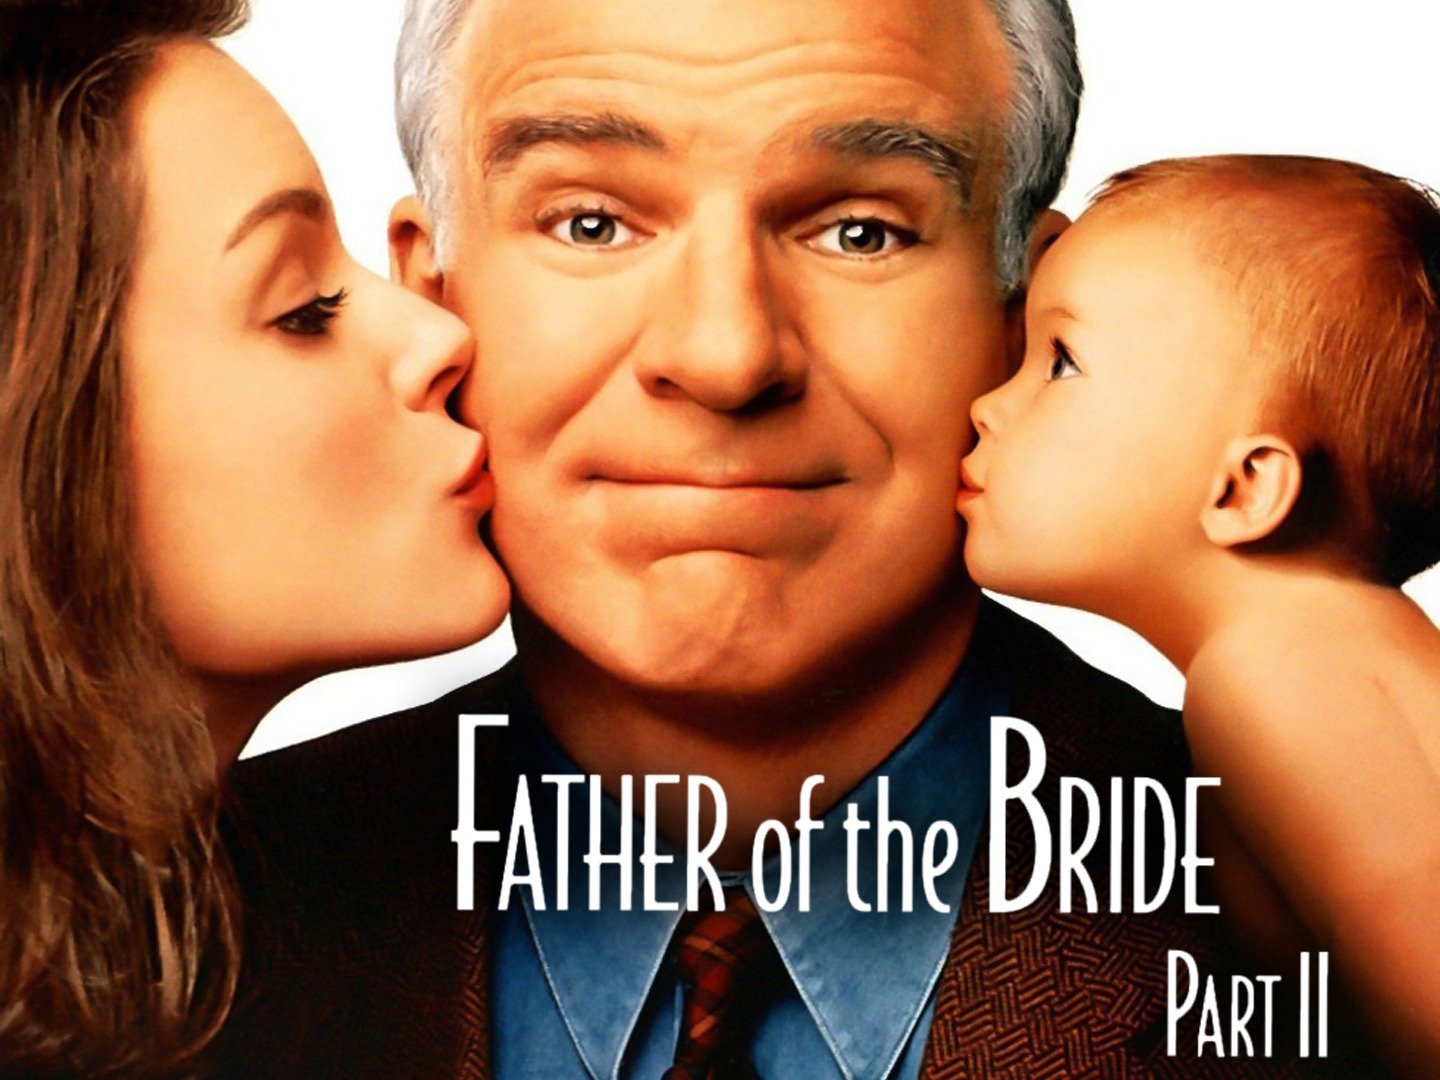 Father of the Bride Part II